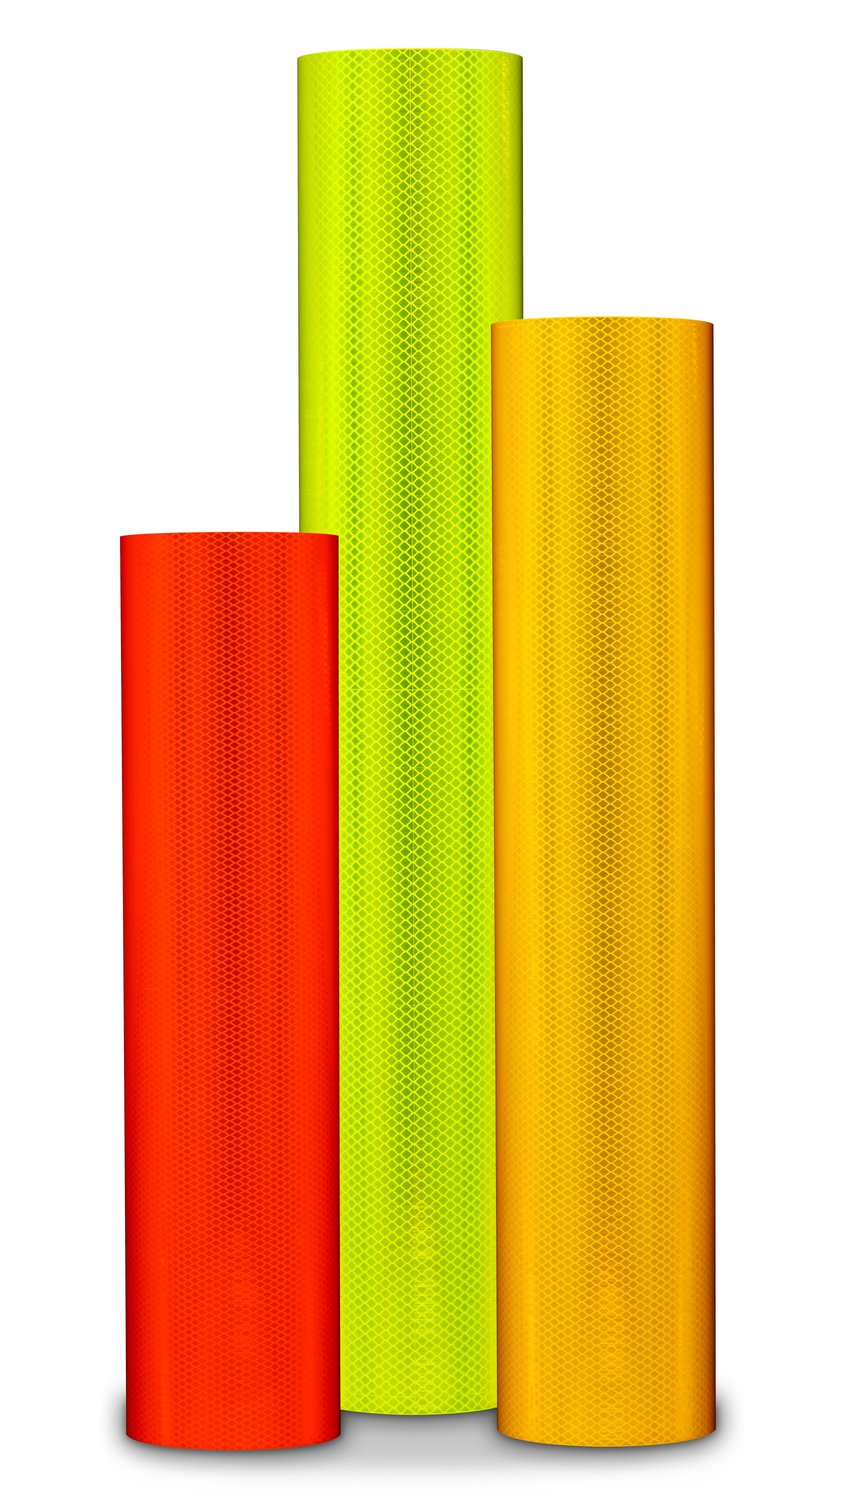 7100152815 - 3M Diamond Grade DG³ Reflective Sheeting 4081, Fluorescent Yellow,
with Lead/Trailer, 5.9687 in x 100 yd